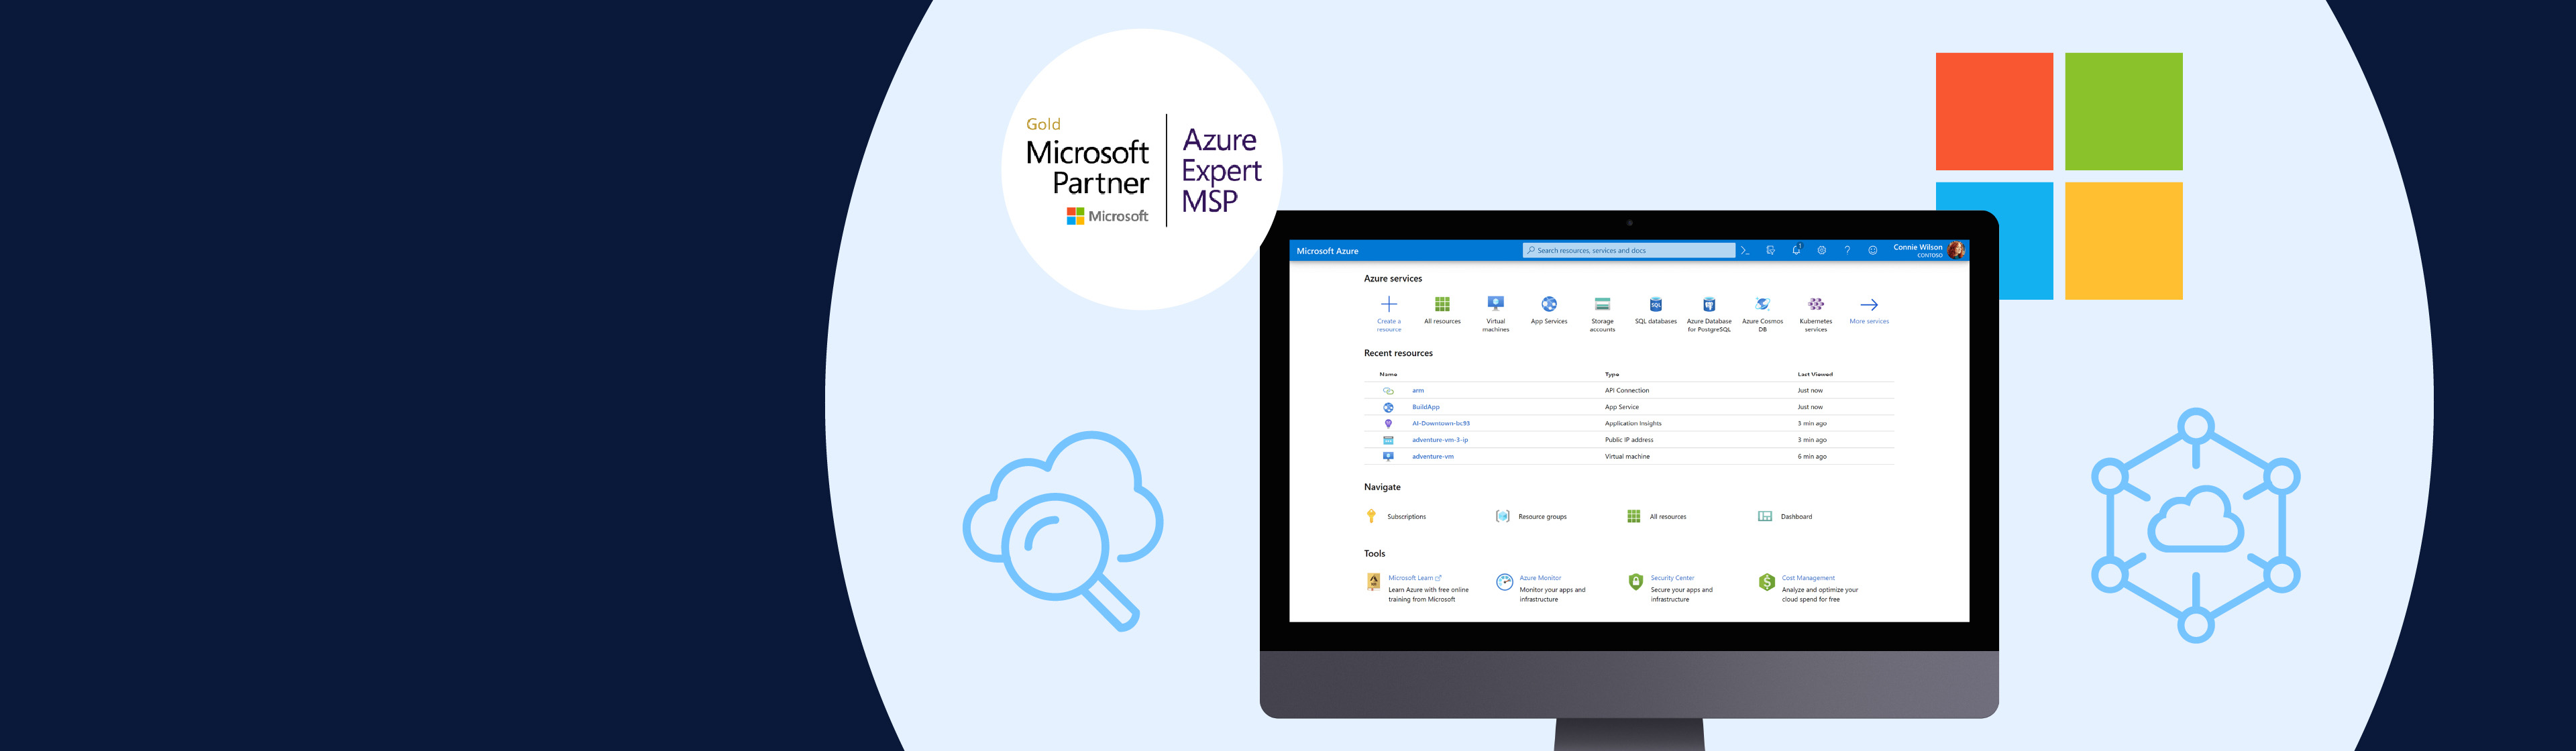 A screen mockup of the Microsoft Azure software surrounded by cloud icons